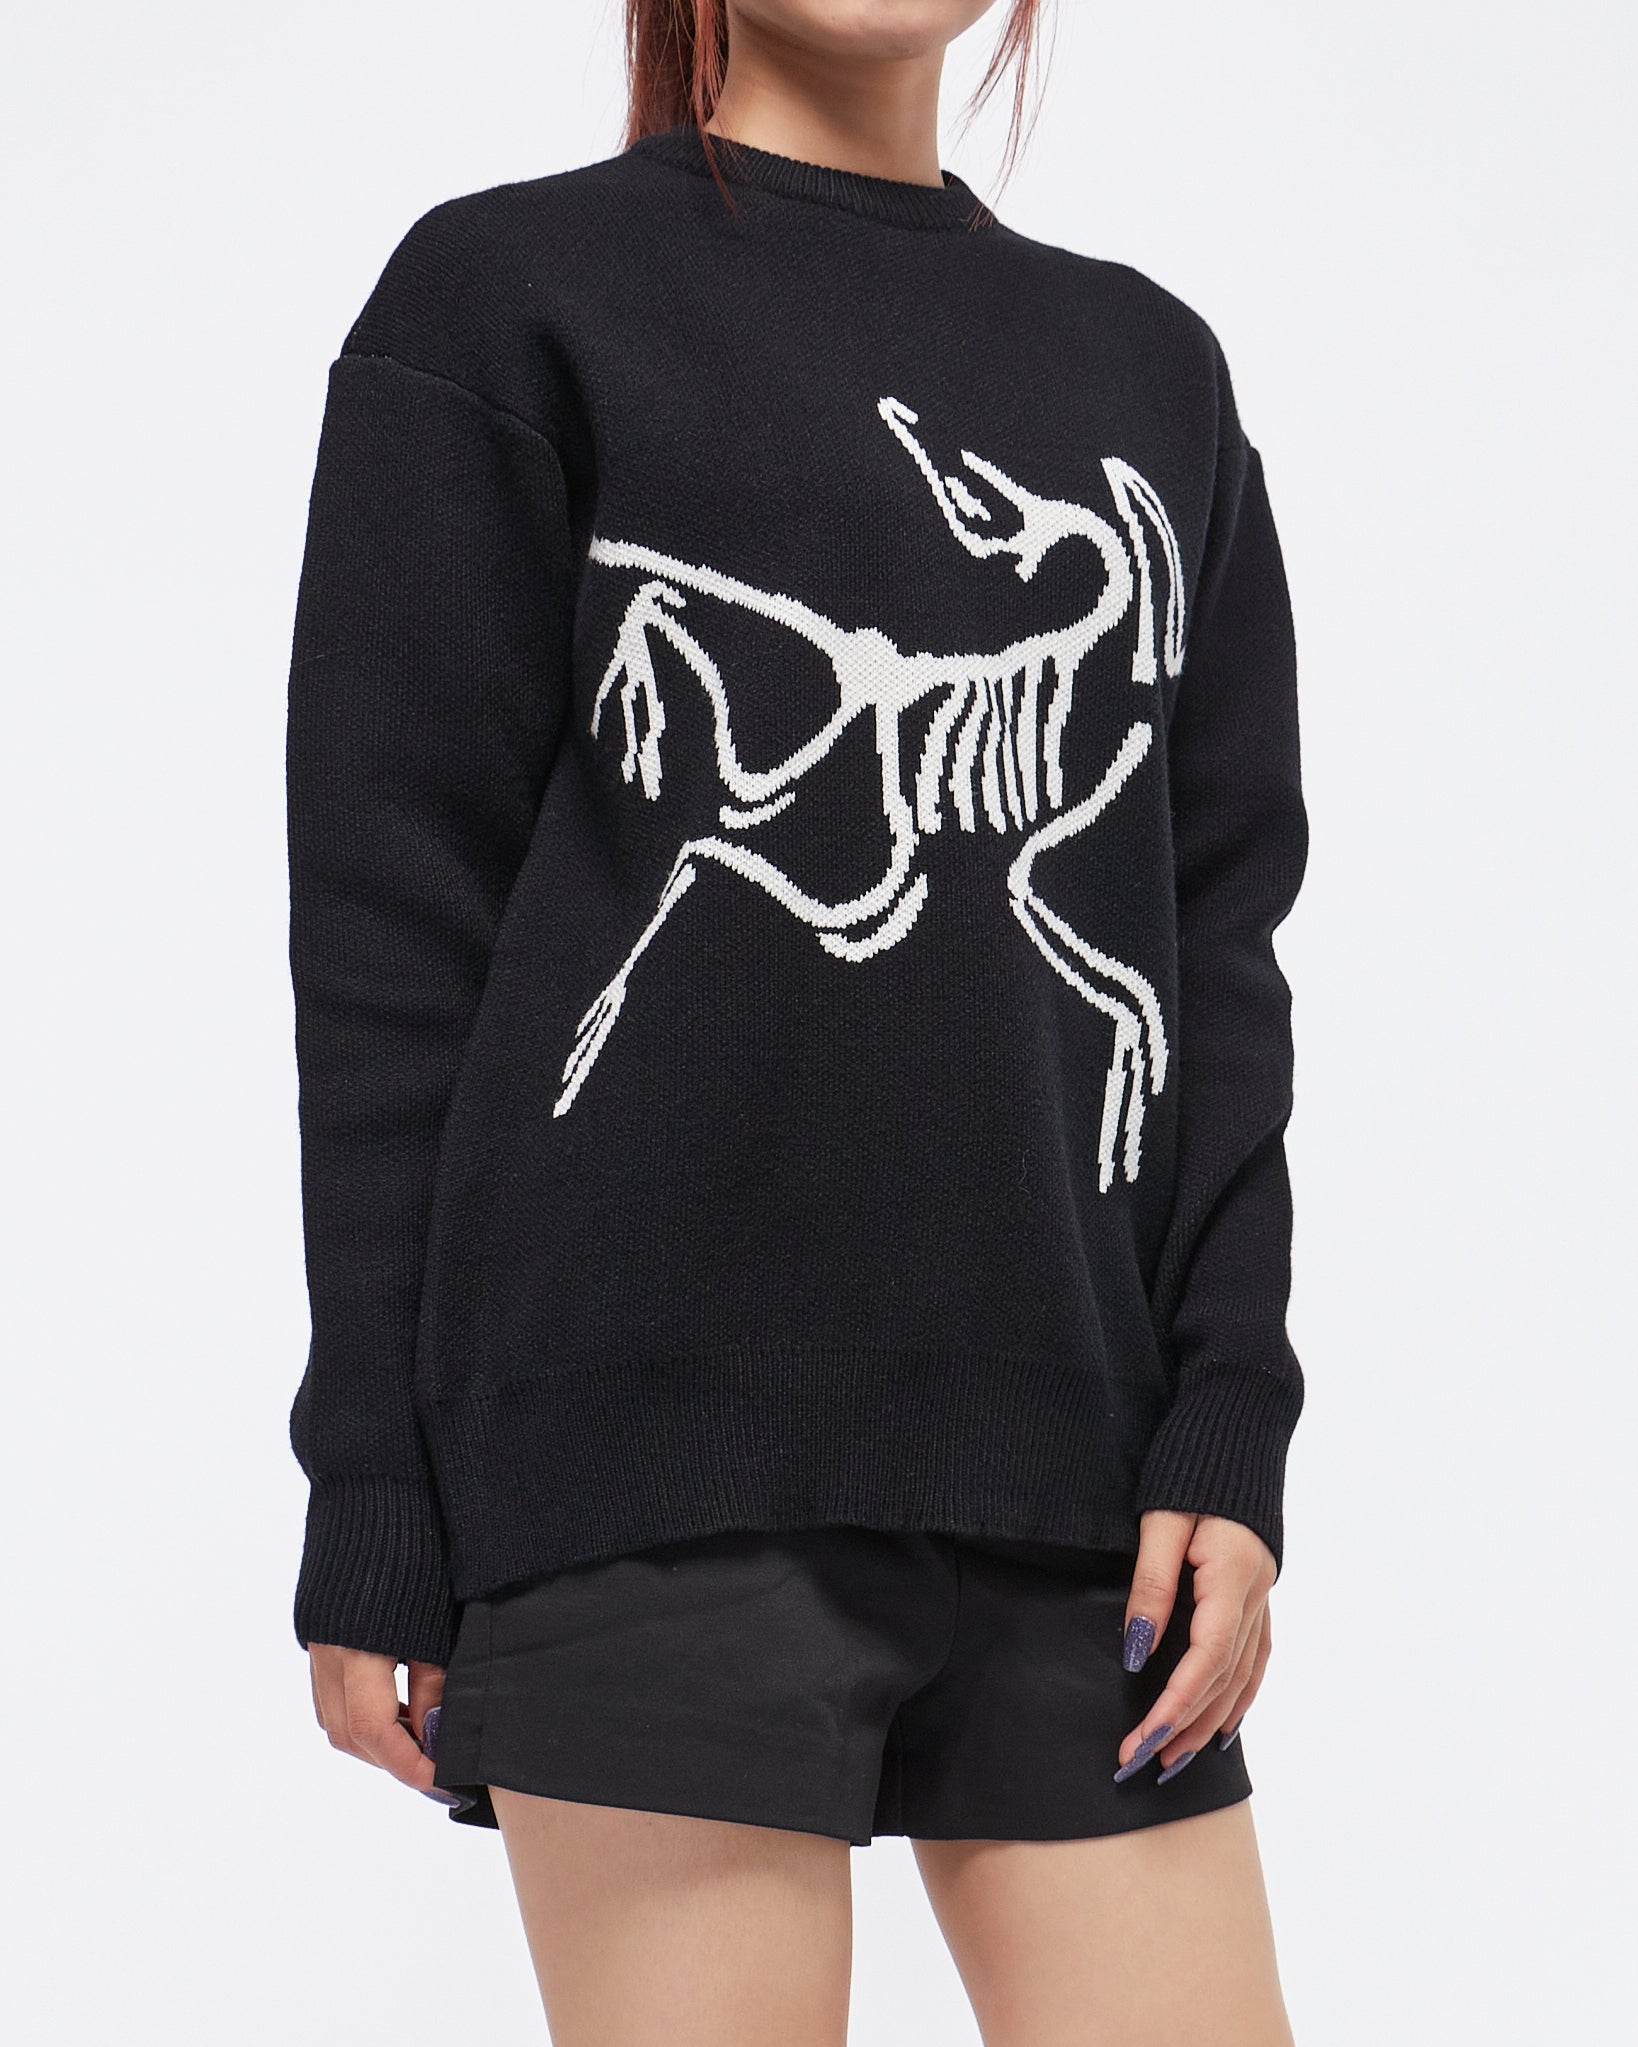 MOI OUTFIT-Logo Embroidered Unisex Knit Sweater 39.90